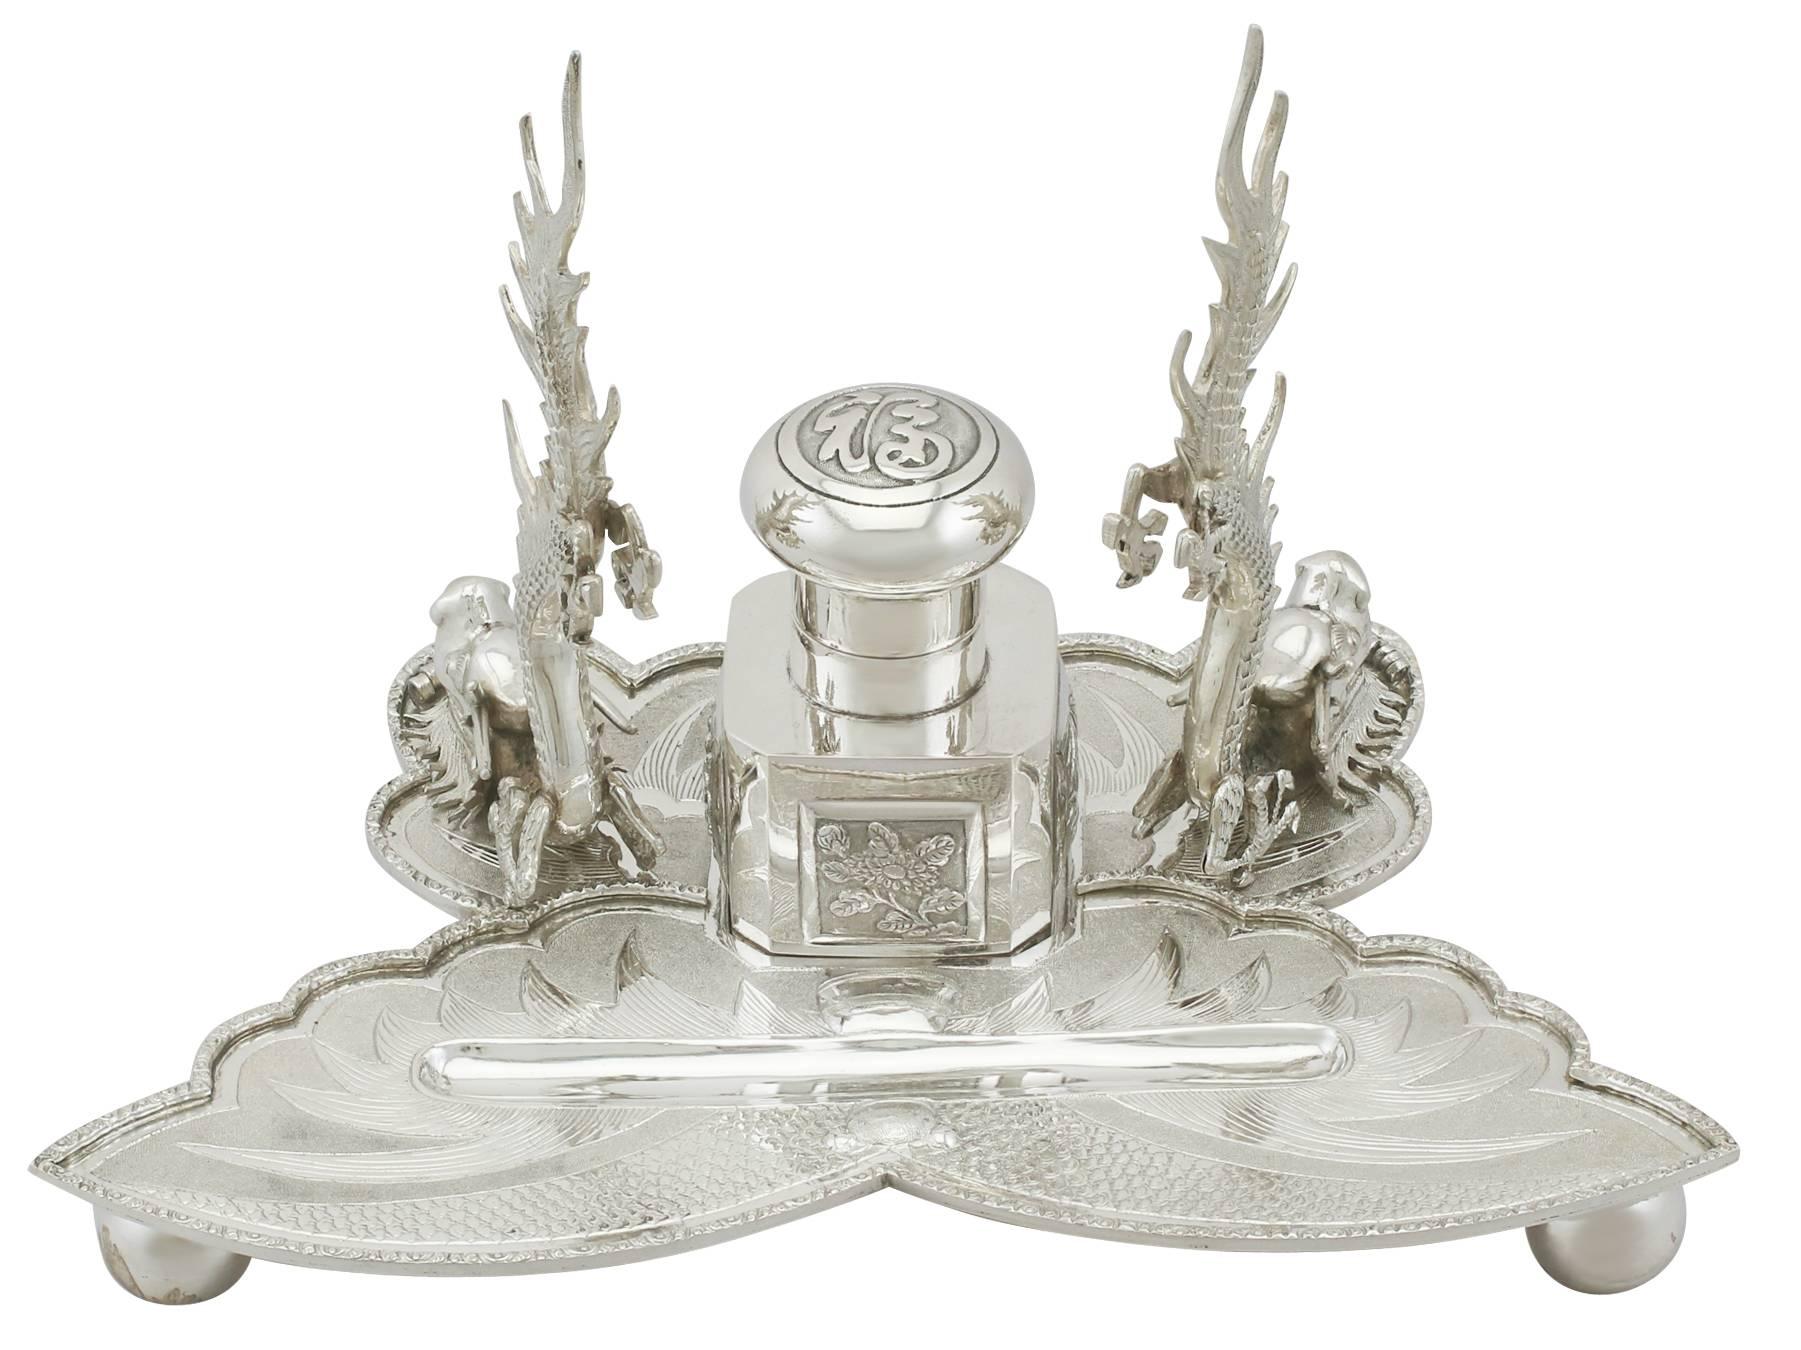 An exceptional, fine and impressive antique Chinese Export silver inkstand and pen stand made by Woshing - boxed; an addition to our ornamental silverware collection.

This exceptional antique Chinese silver inkstand and pen rack has an incurved